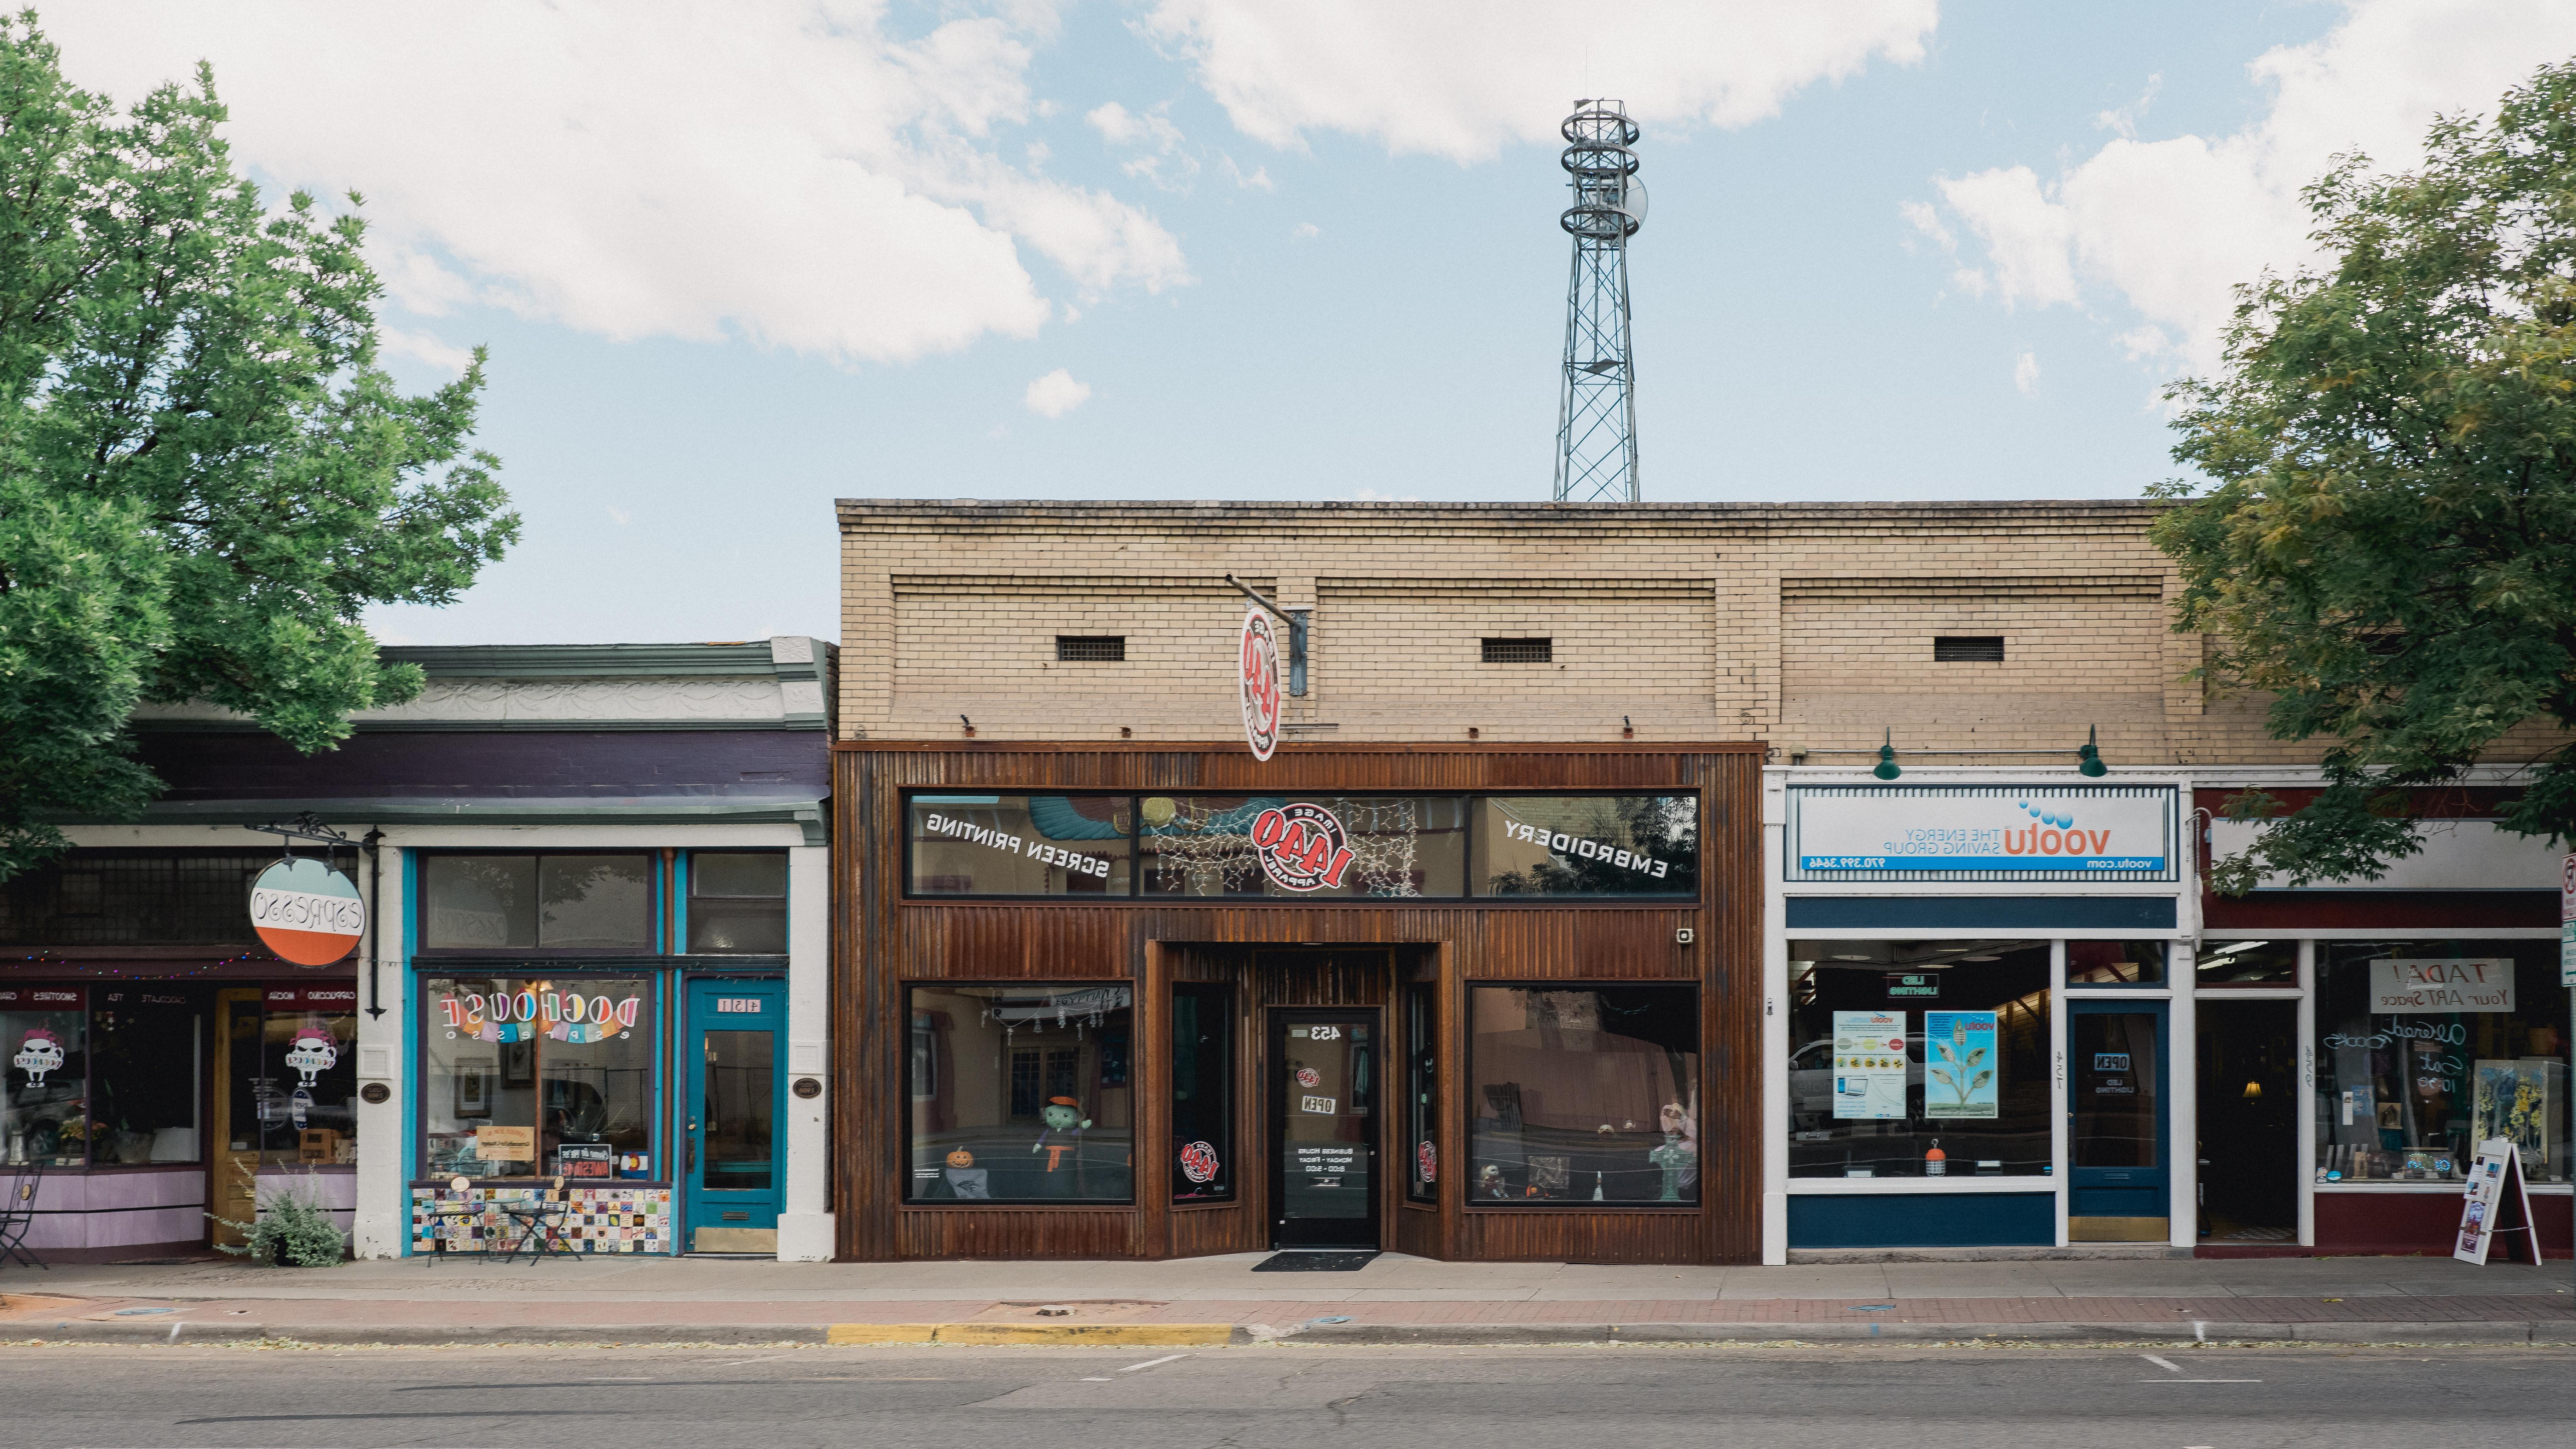 A series of storefronts in Delta County, Colorado